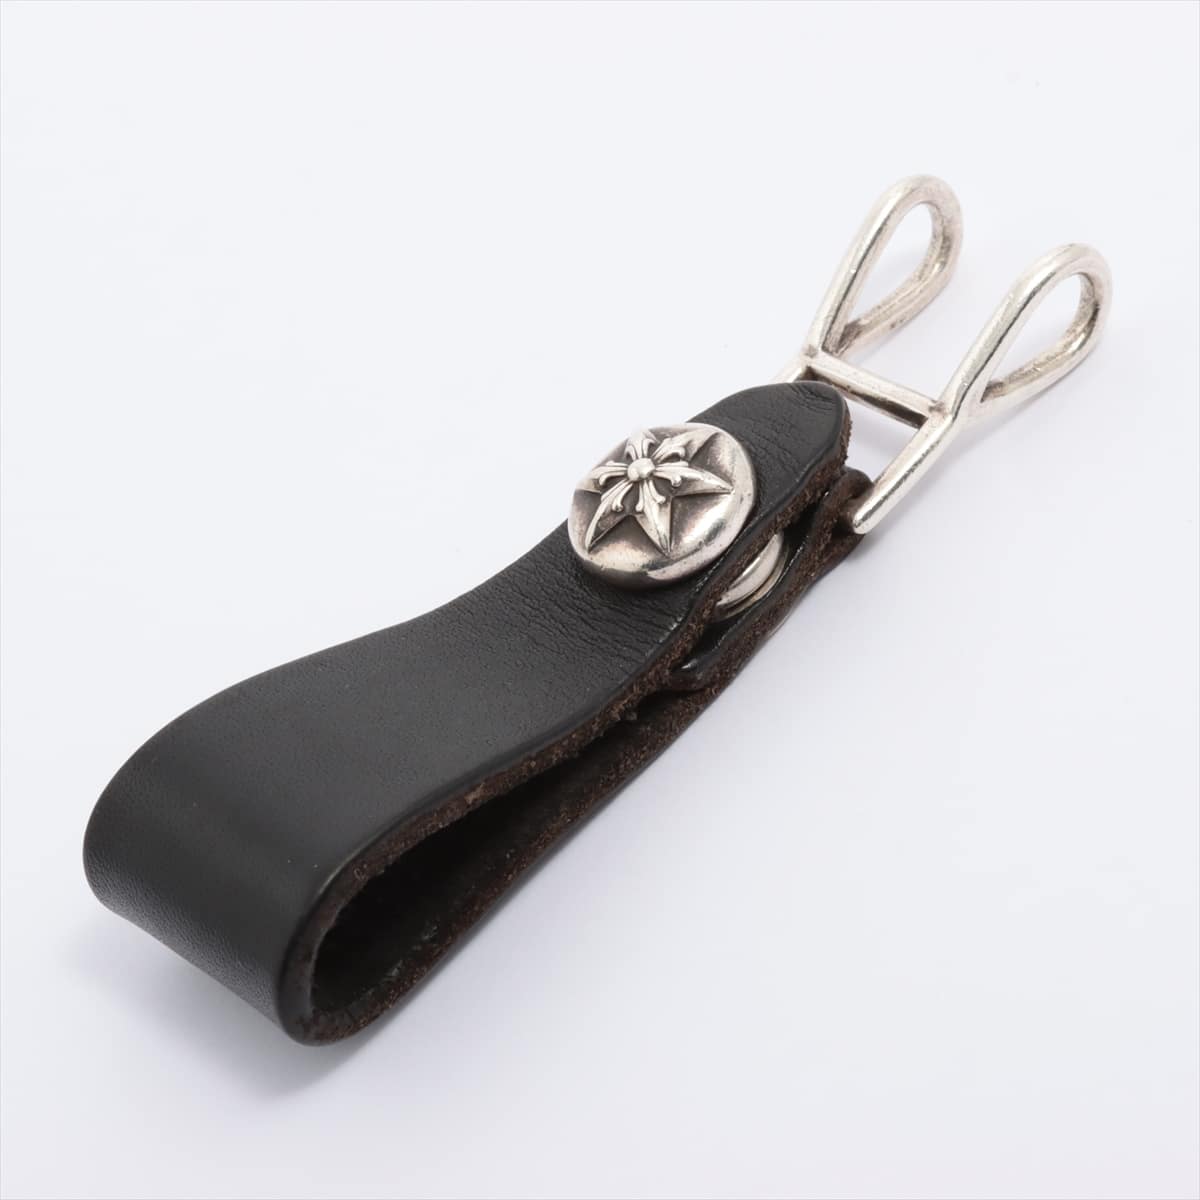 Chrome Hearts W belt loop Keyring Leather With invoice